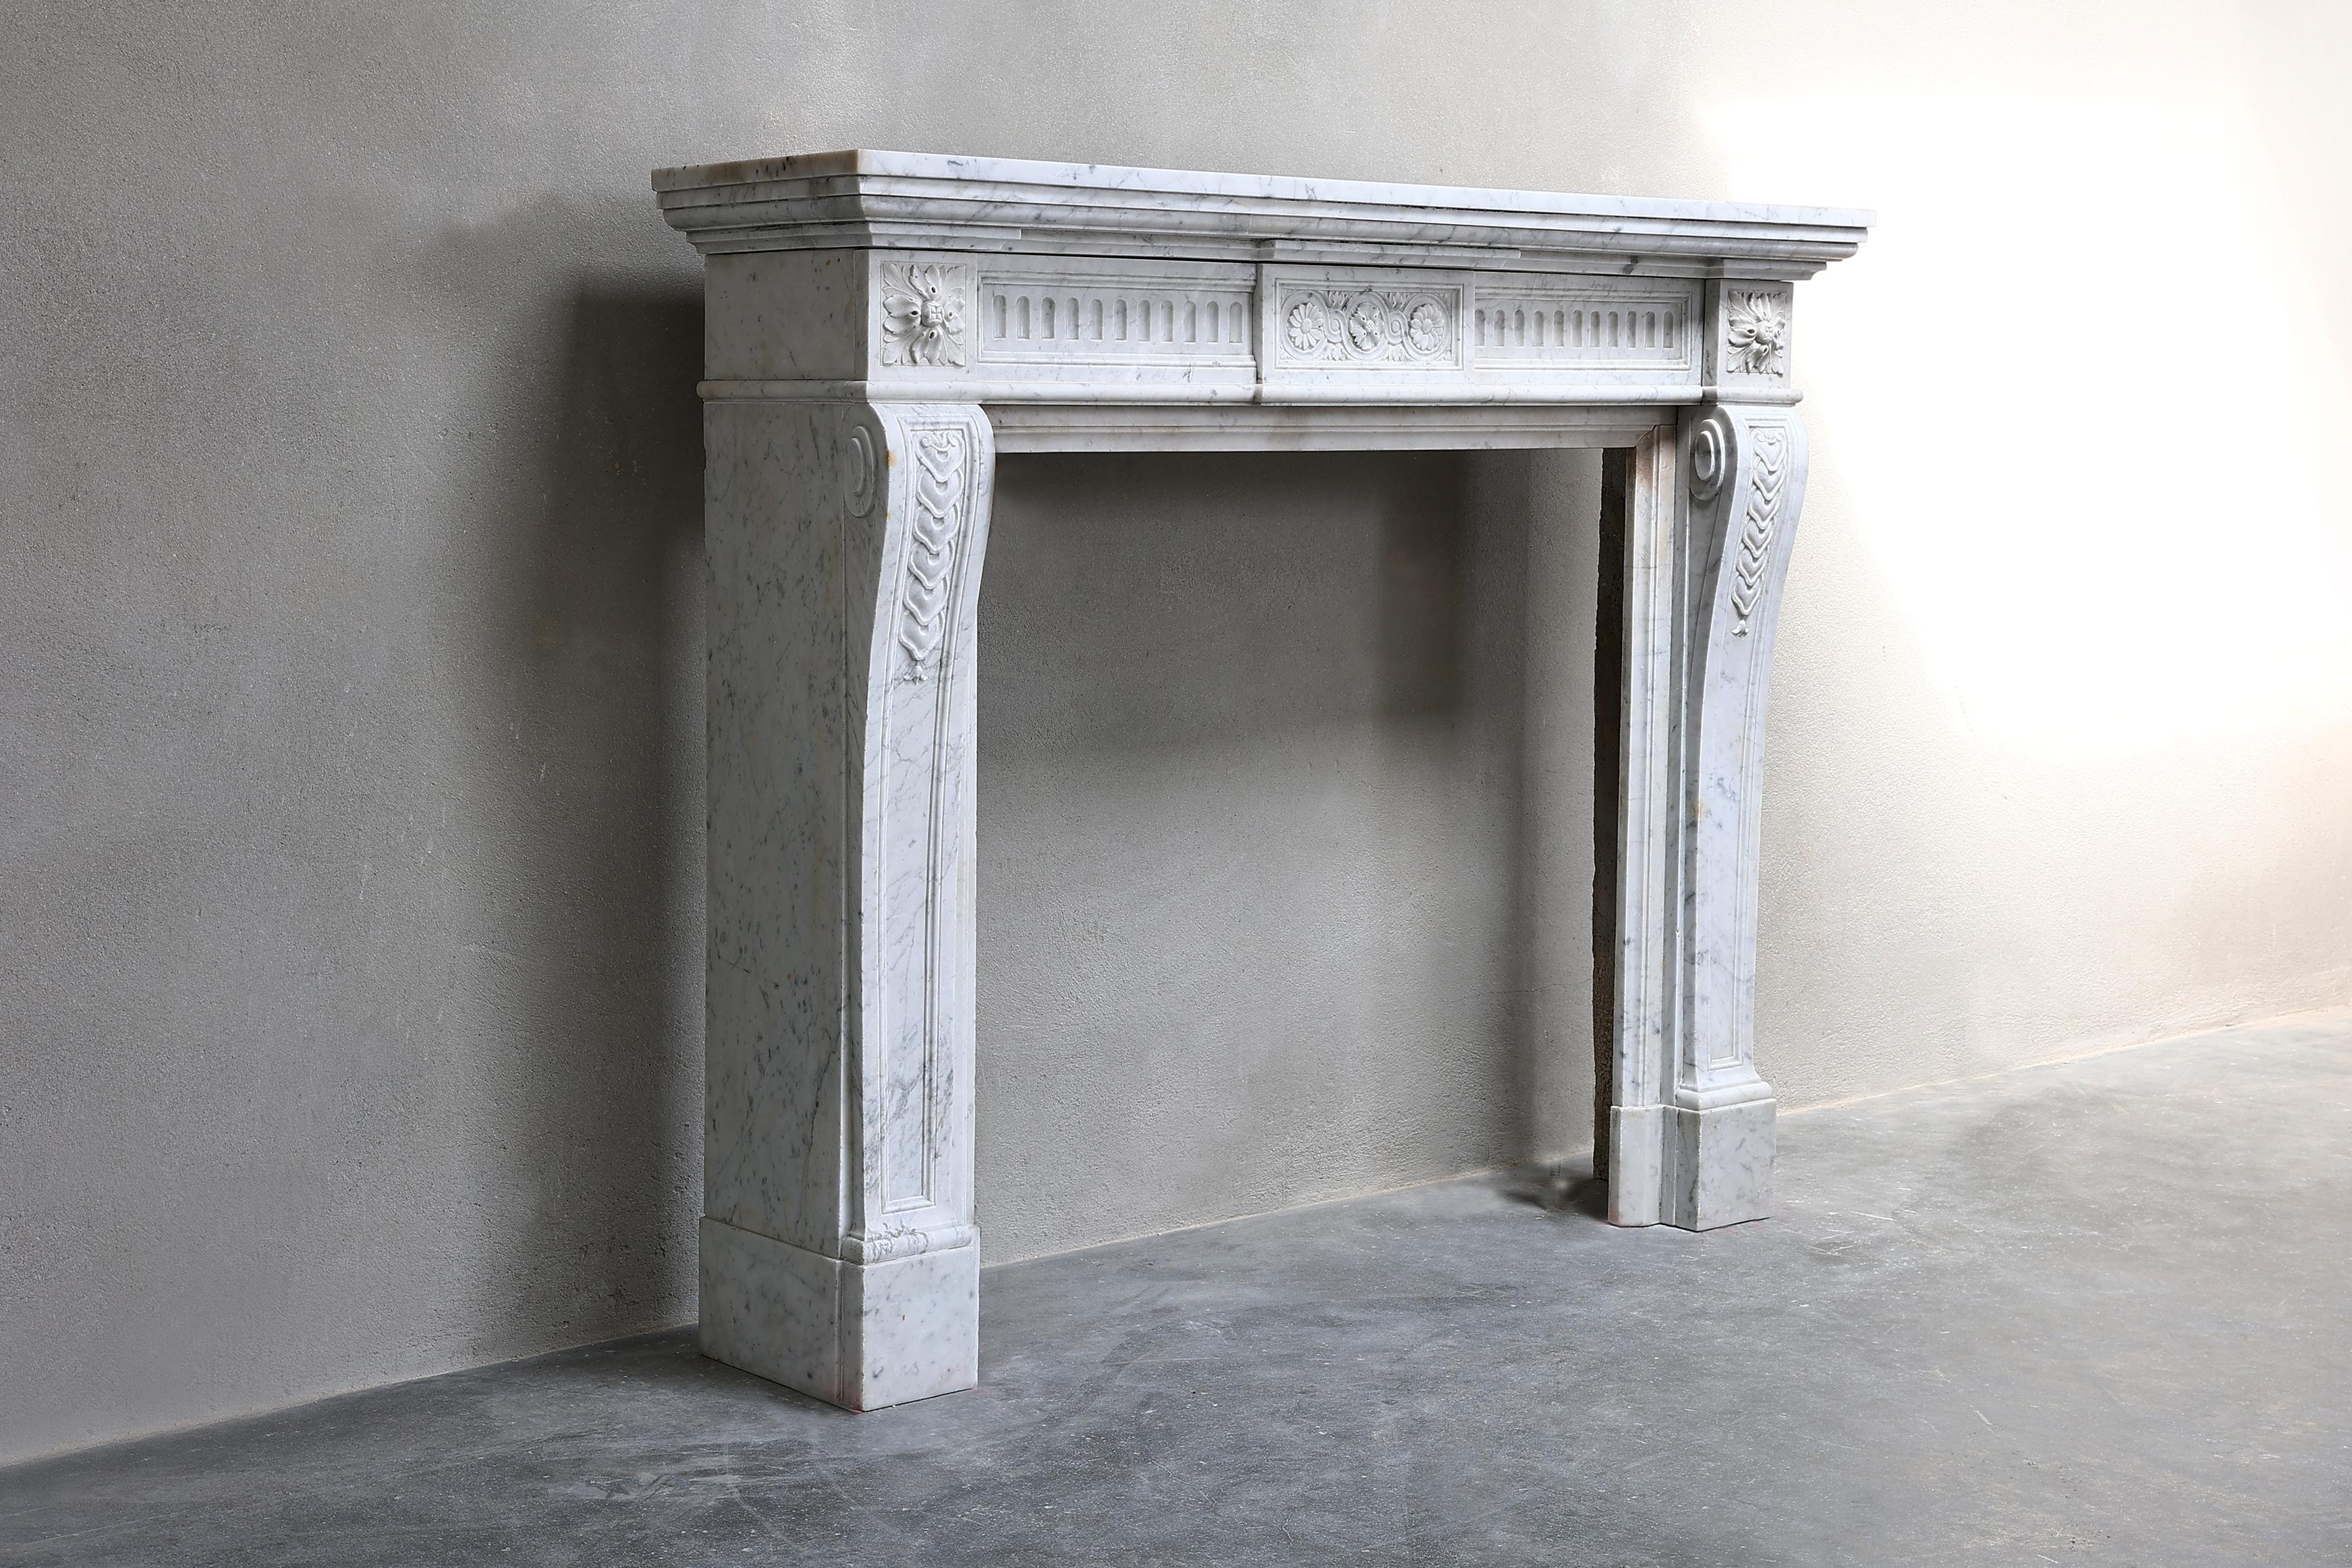 Beautiful 19th century Carrara marble fireplace in the style of Louis XVI. This antique fireplace has straight shapes and beautiful ornaments in the front part and on the legs. This charming fireplace has a compact size and chic look.